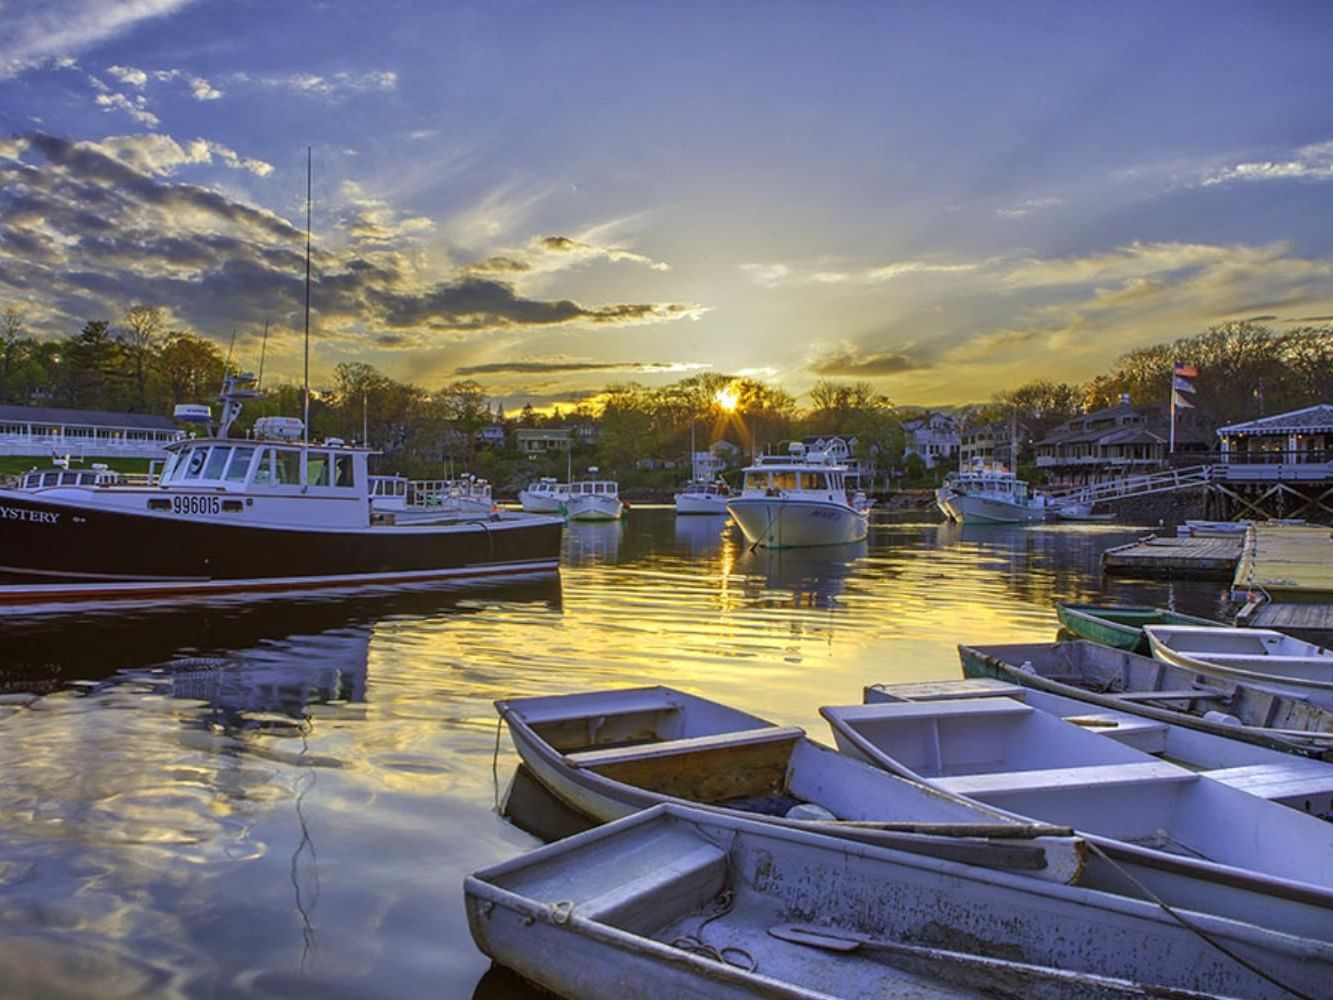 Boats docked at sunset with the sun setting behind them at Perkins Cove near Anchorage by the Sea